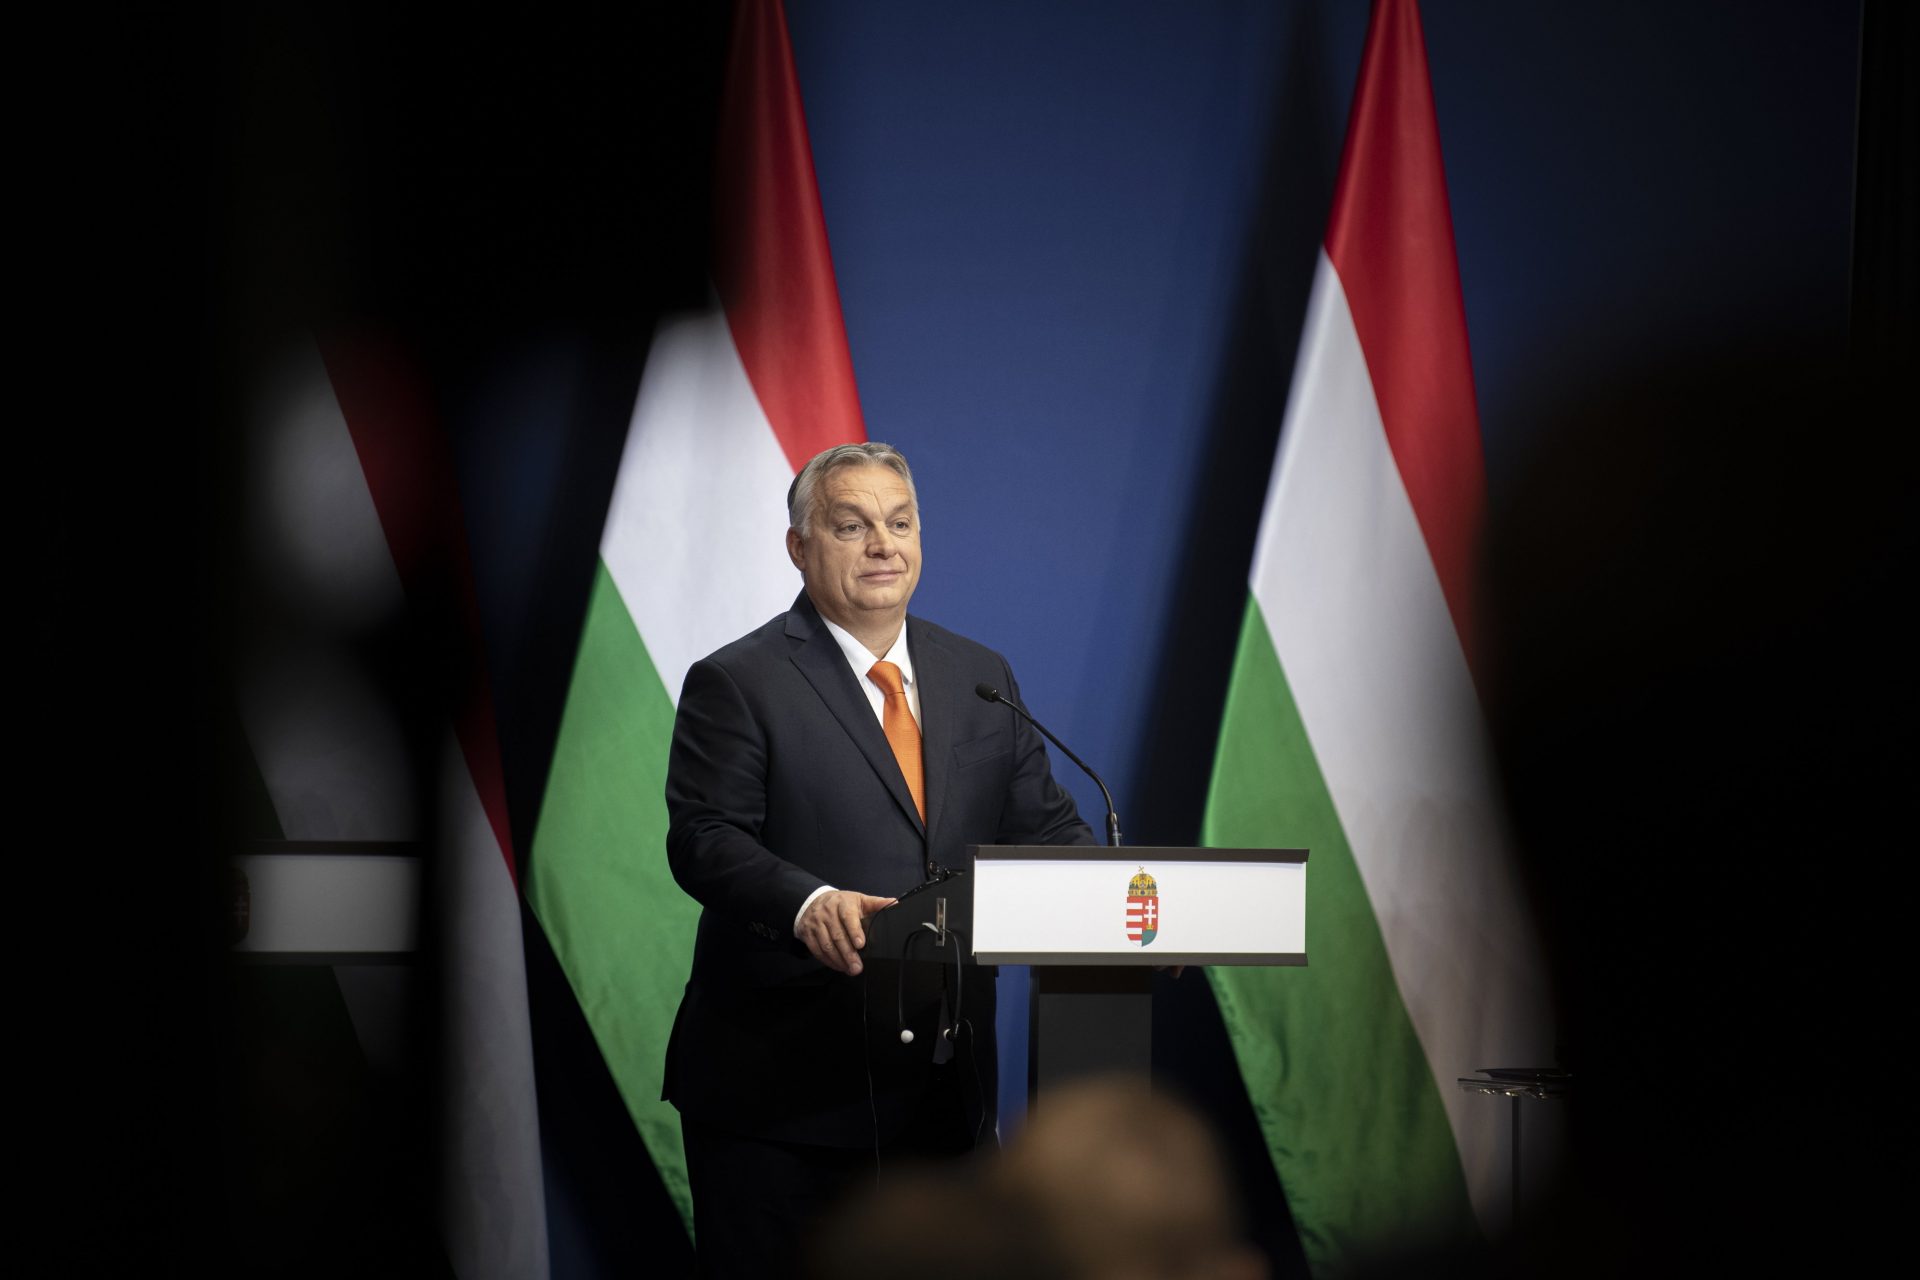 Orbán to attend summit of European conservative party leaders in Madrid at weekend